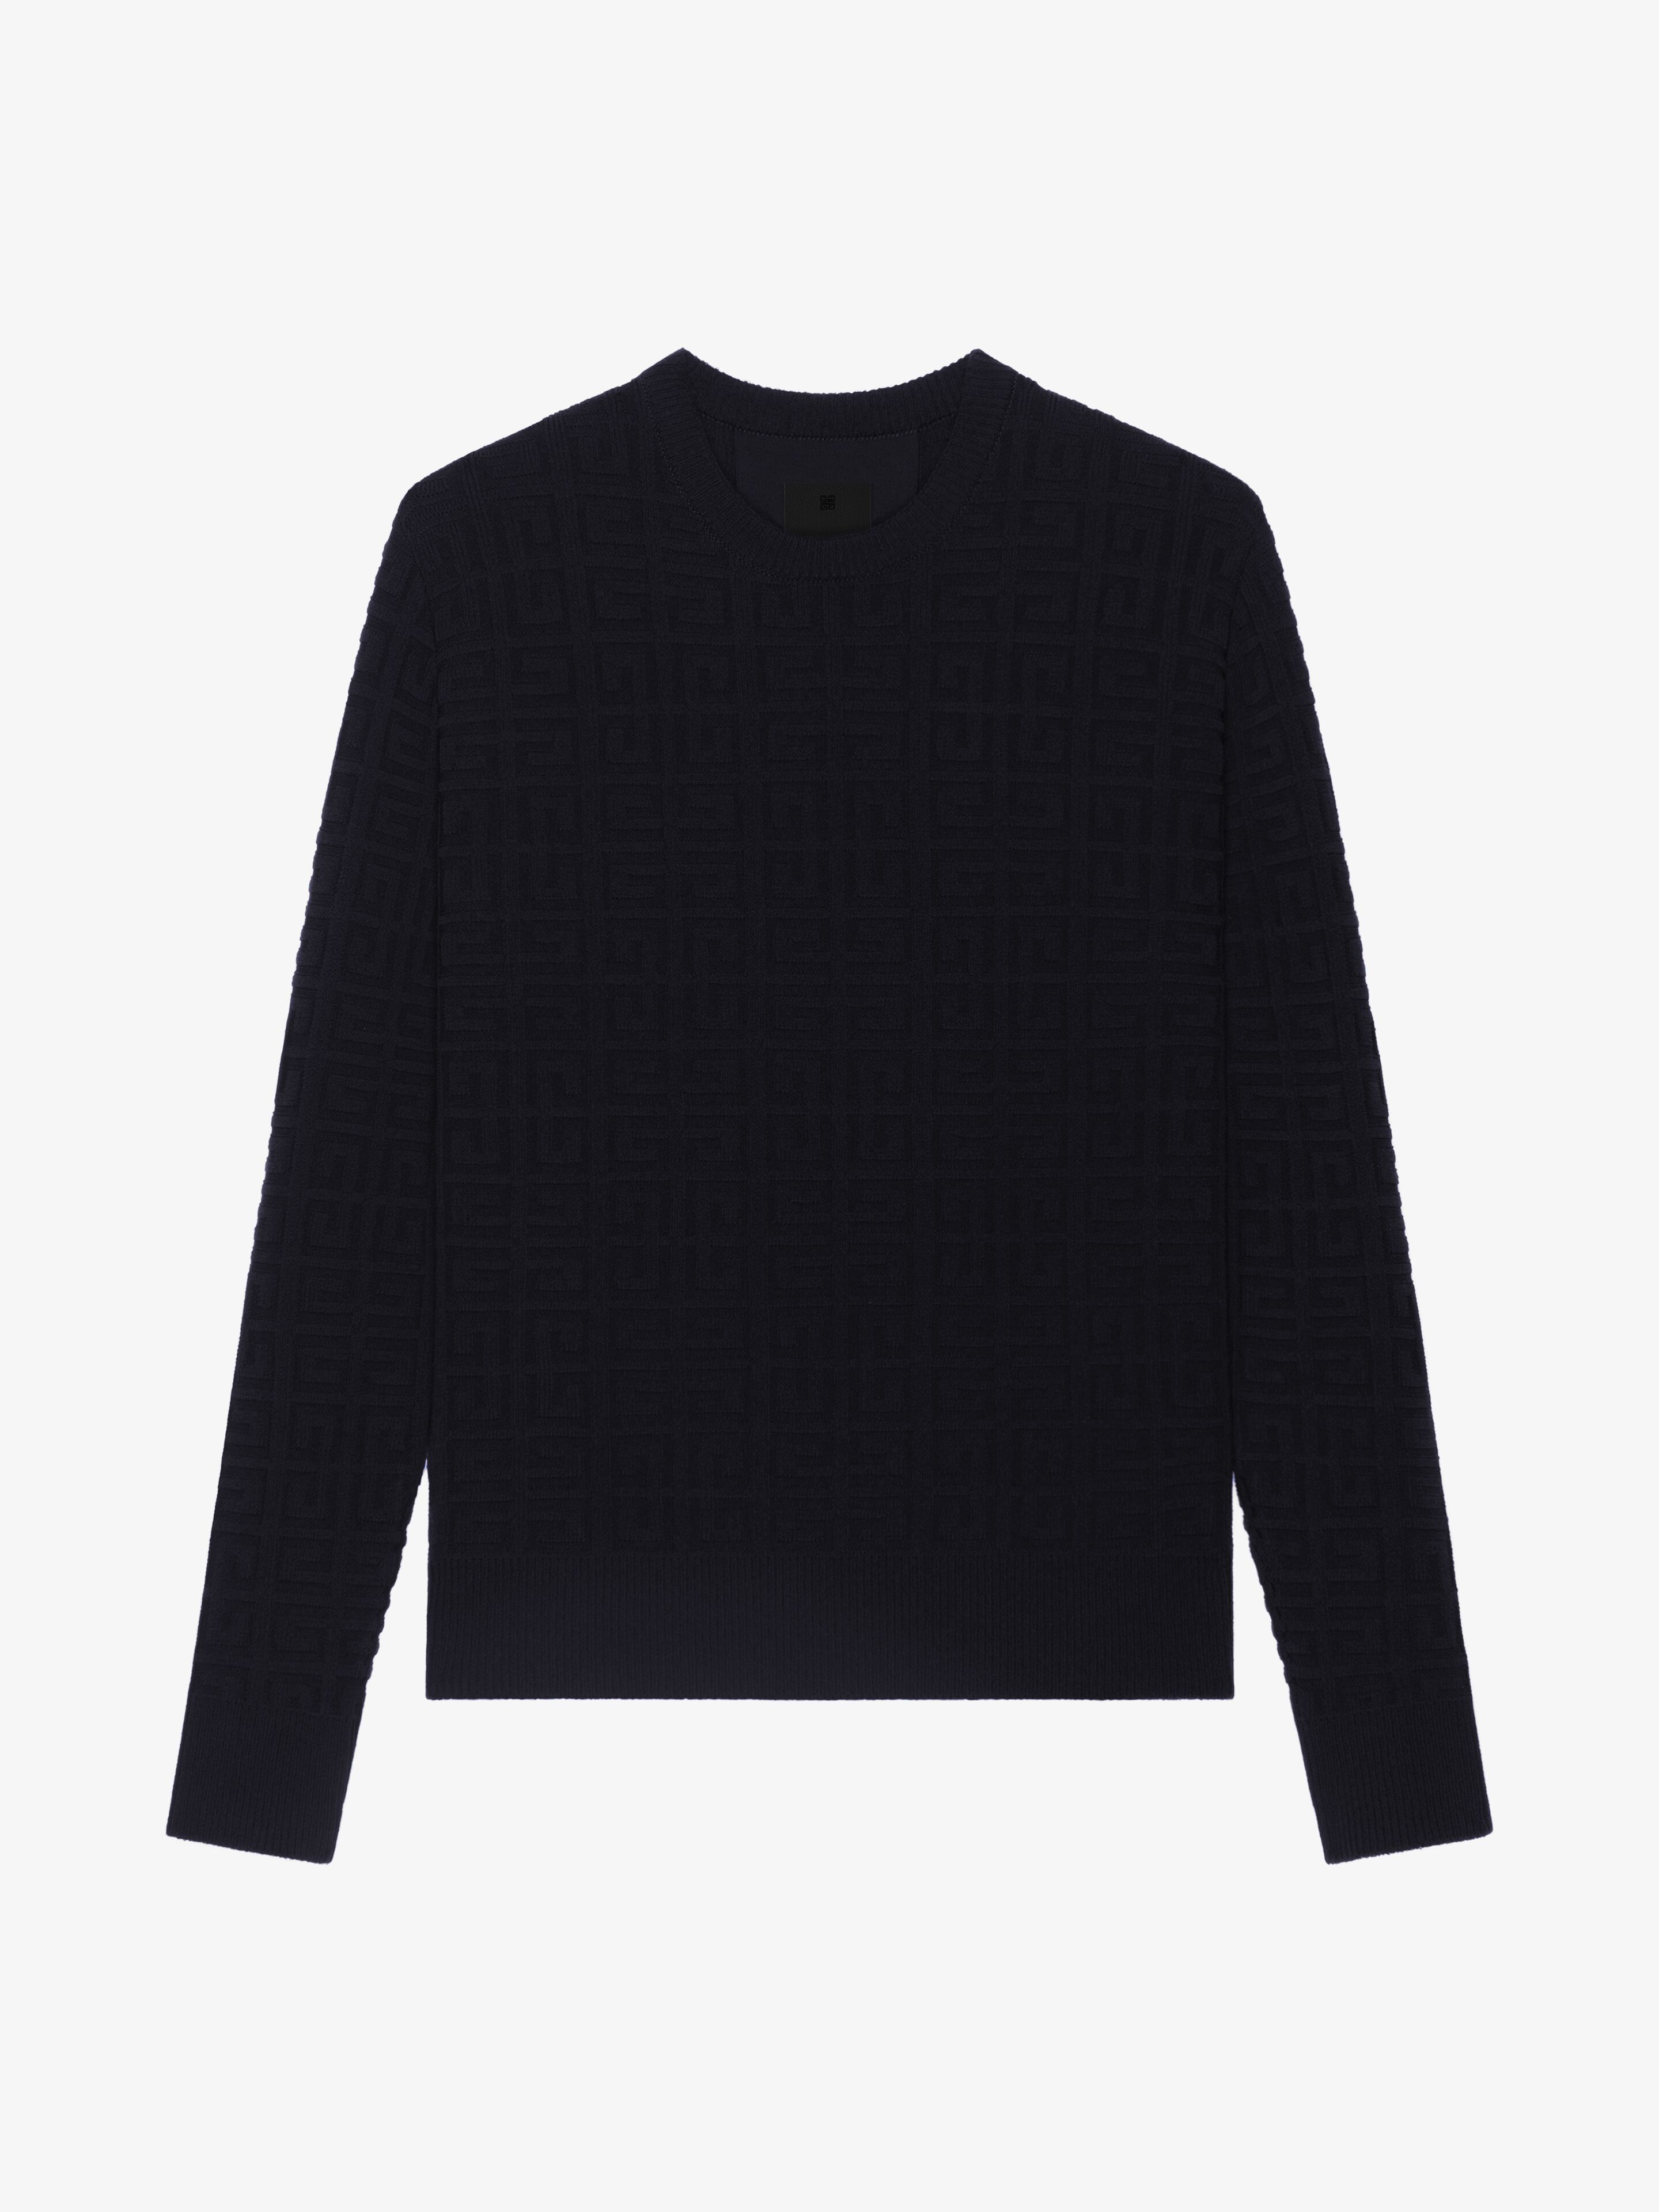 Luxury Knitwear Collection for Men